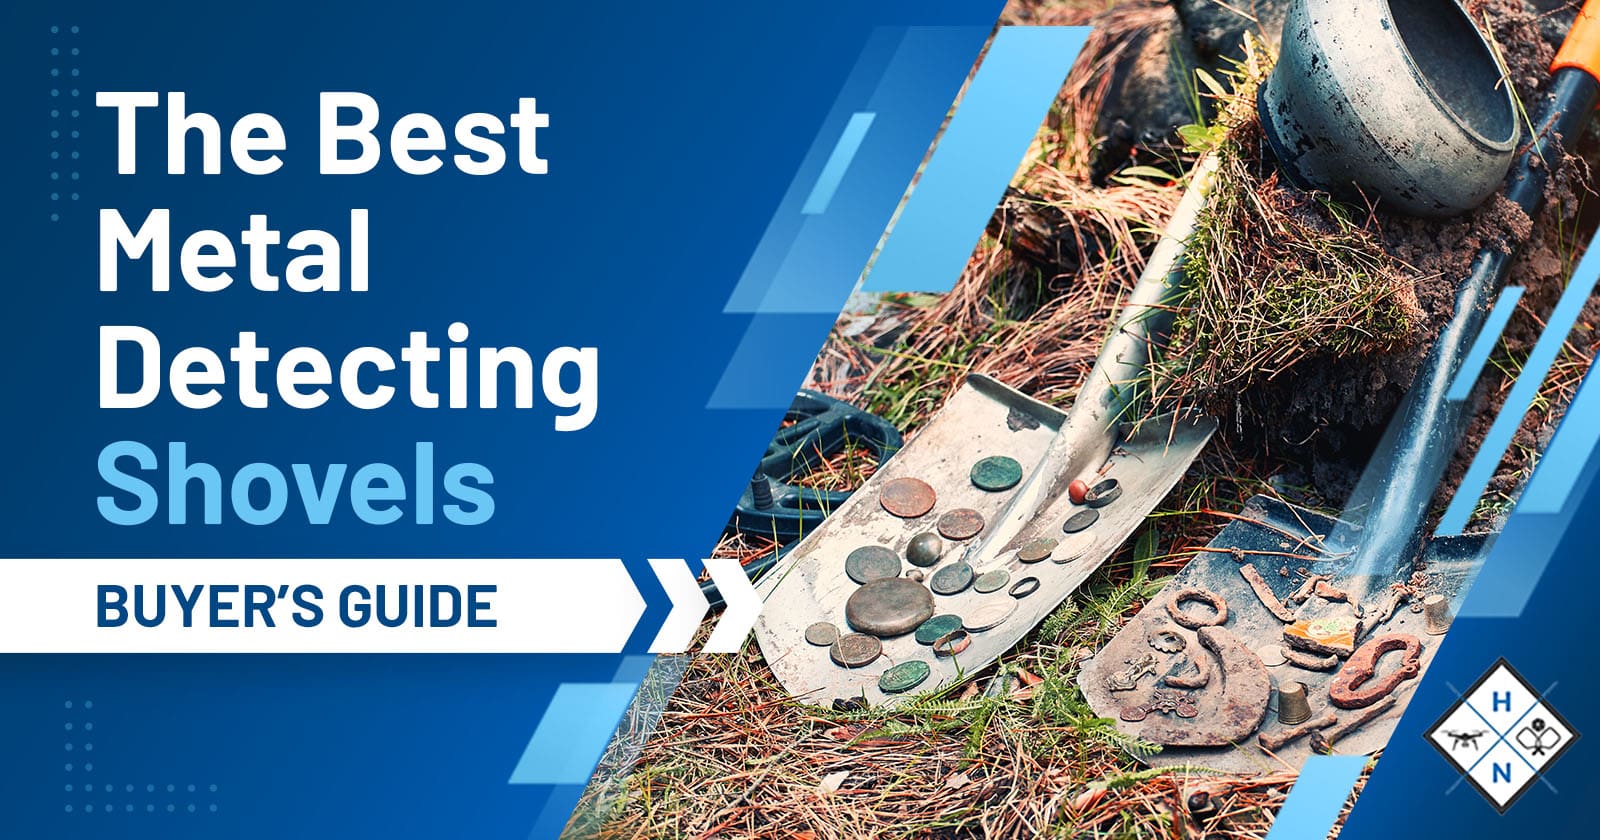 The Best Metal Detecting Shovels [BUYER'S GUIDE]